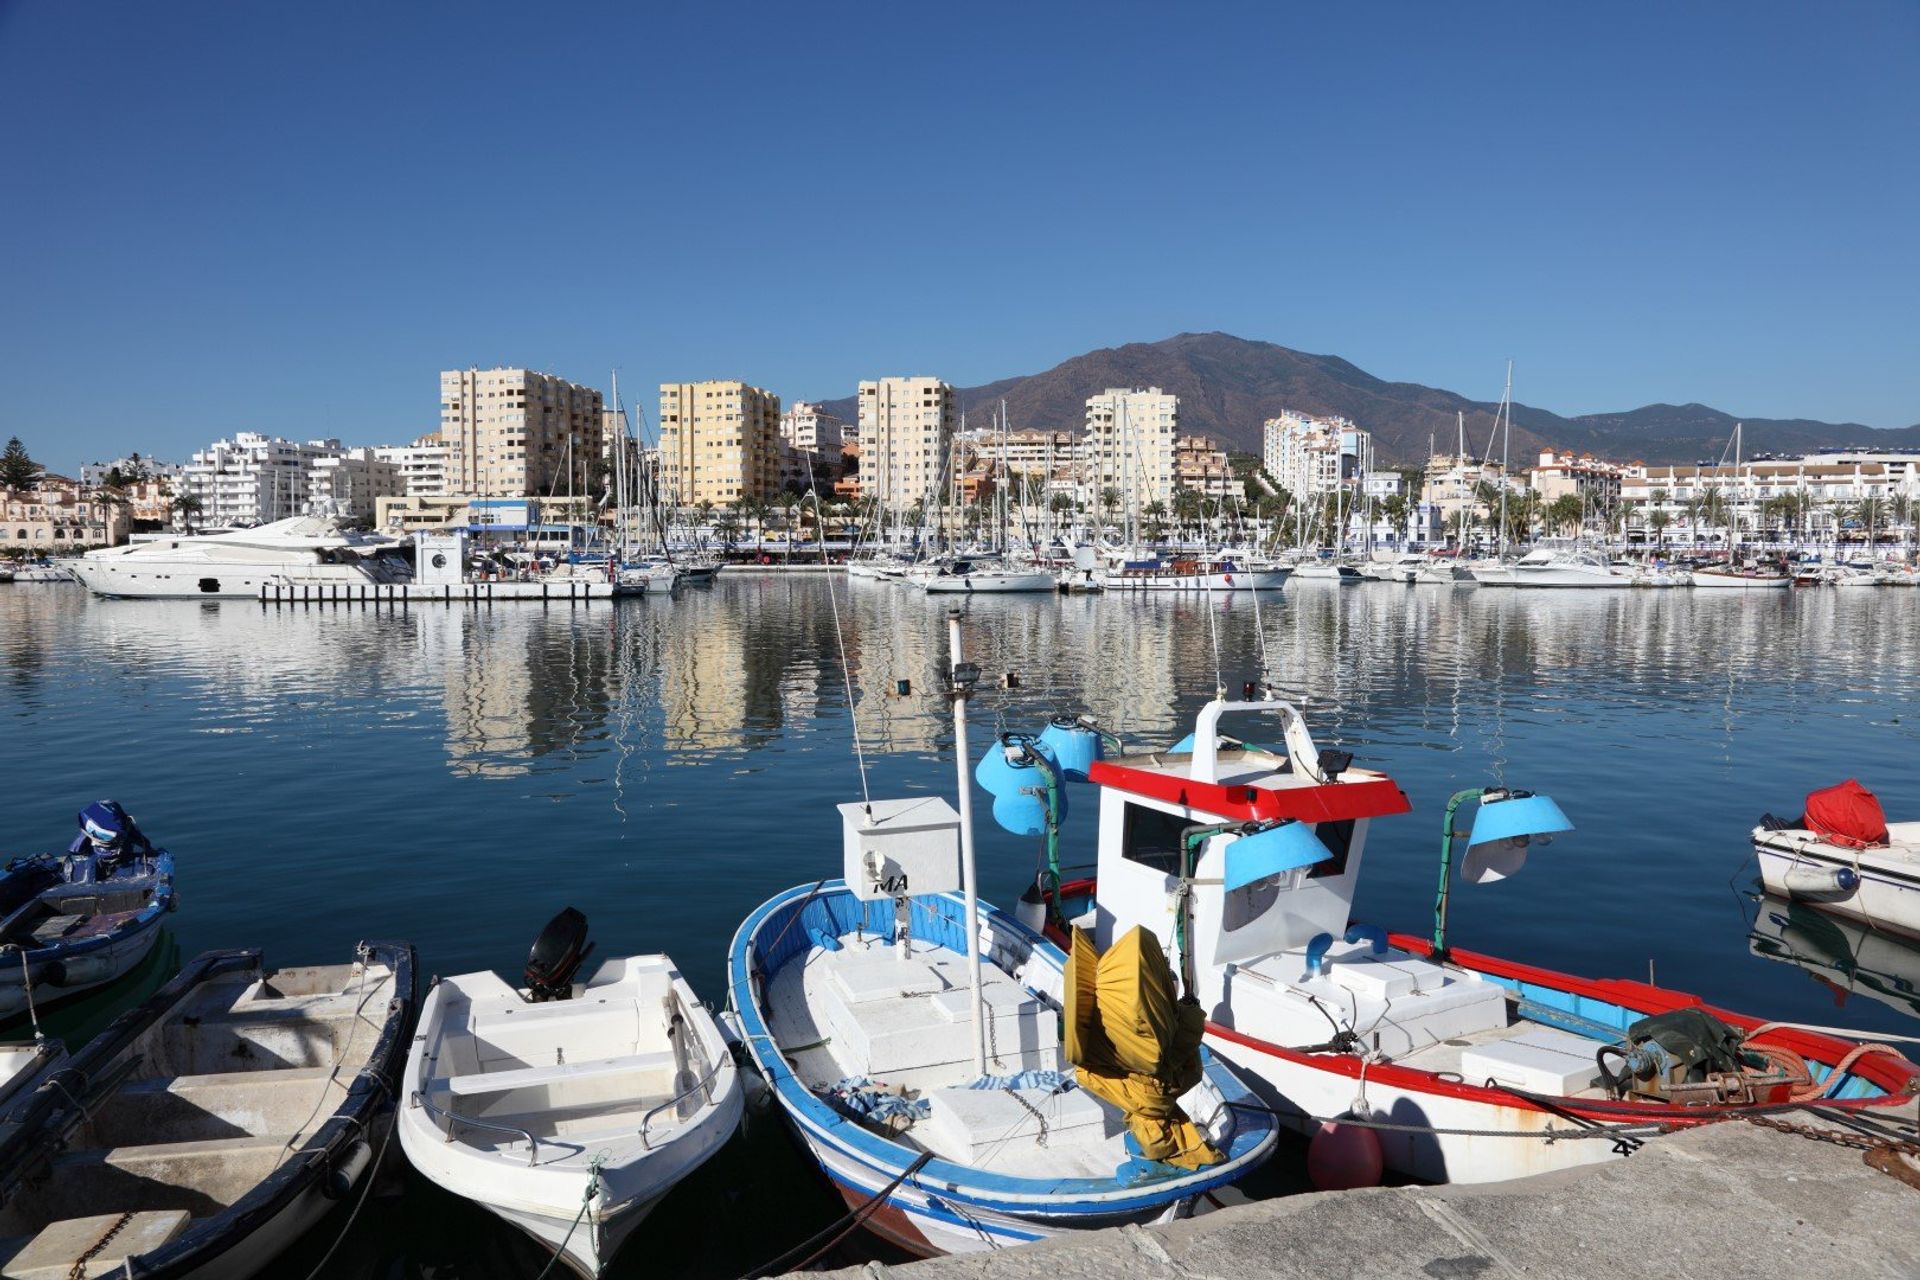 Estepona's marina is home to luxury yachts, traditional fishing boats and plenty of bars and restaurants